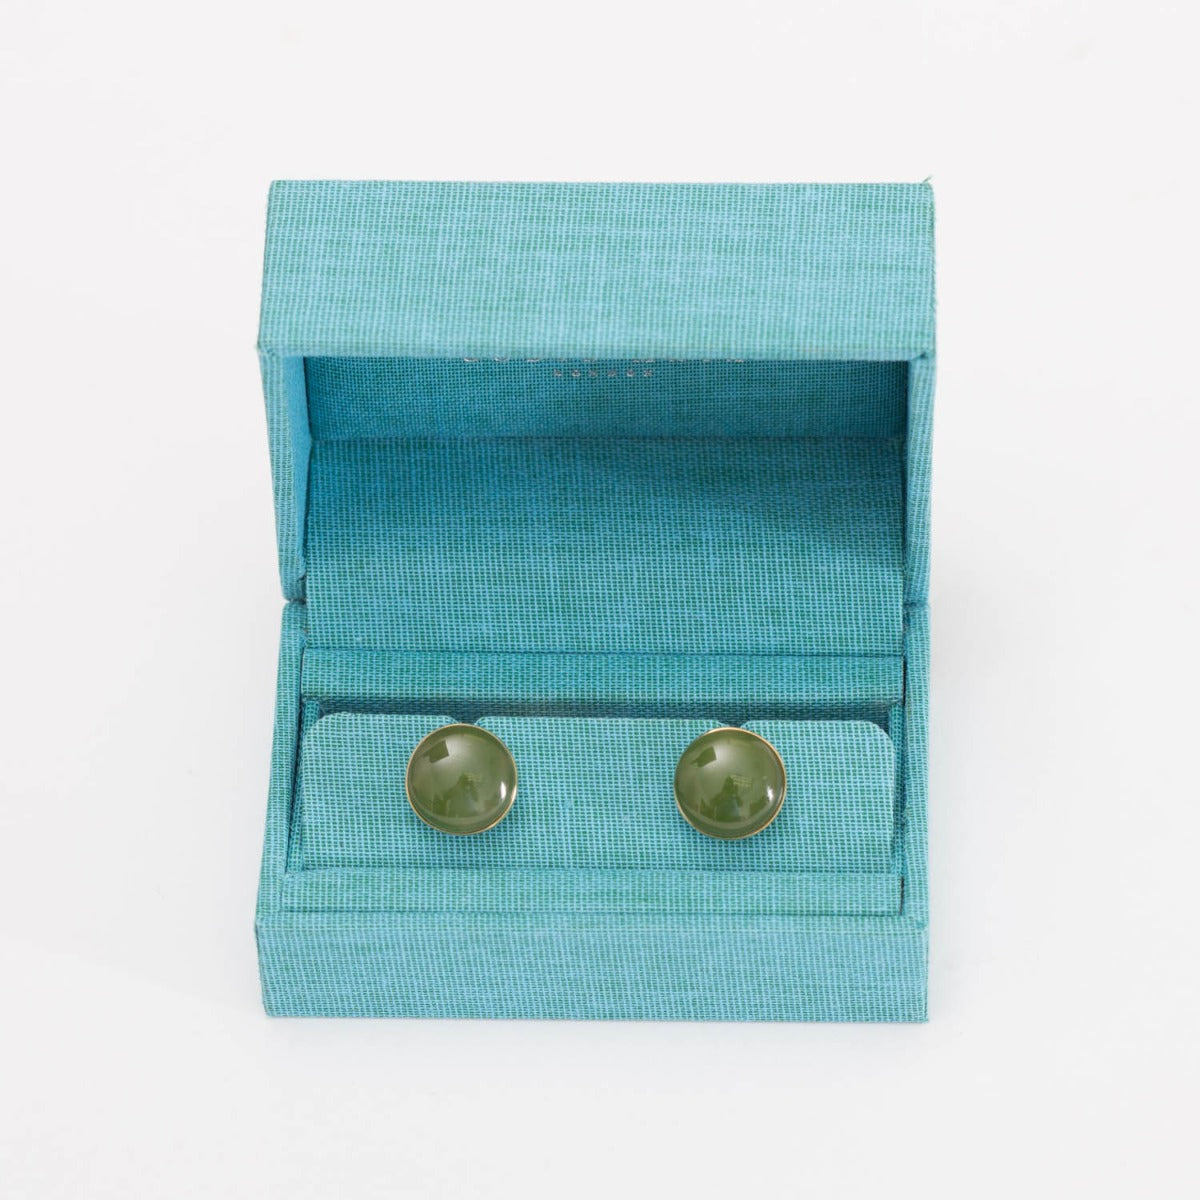 Ethically sourced, handmade in England, a pair of Jade Stone Chain Cufflinks in a blue box by KirbyAllison.com.